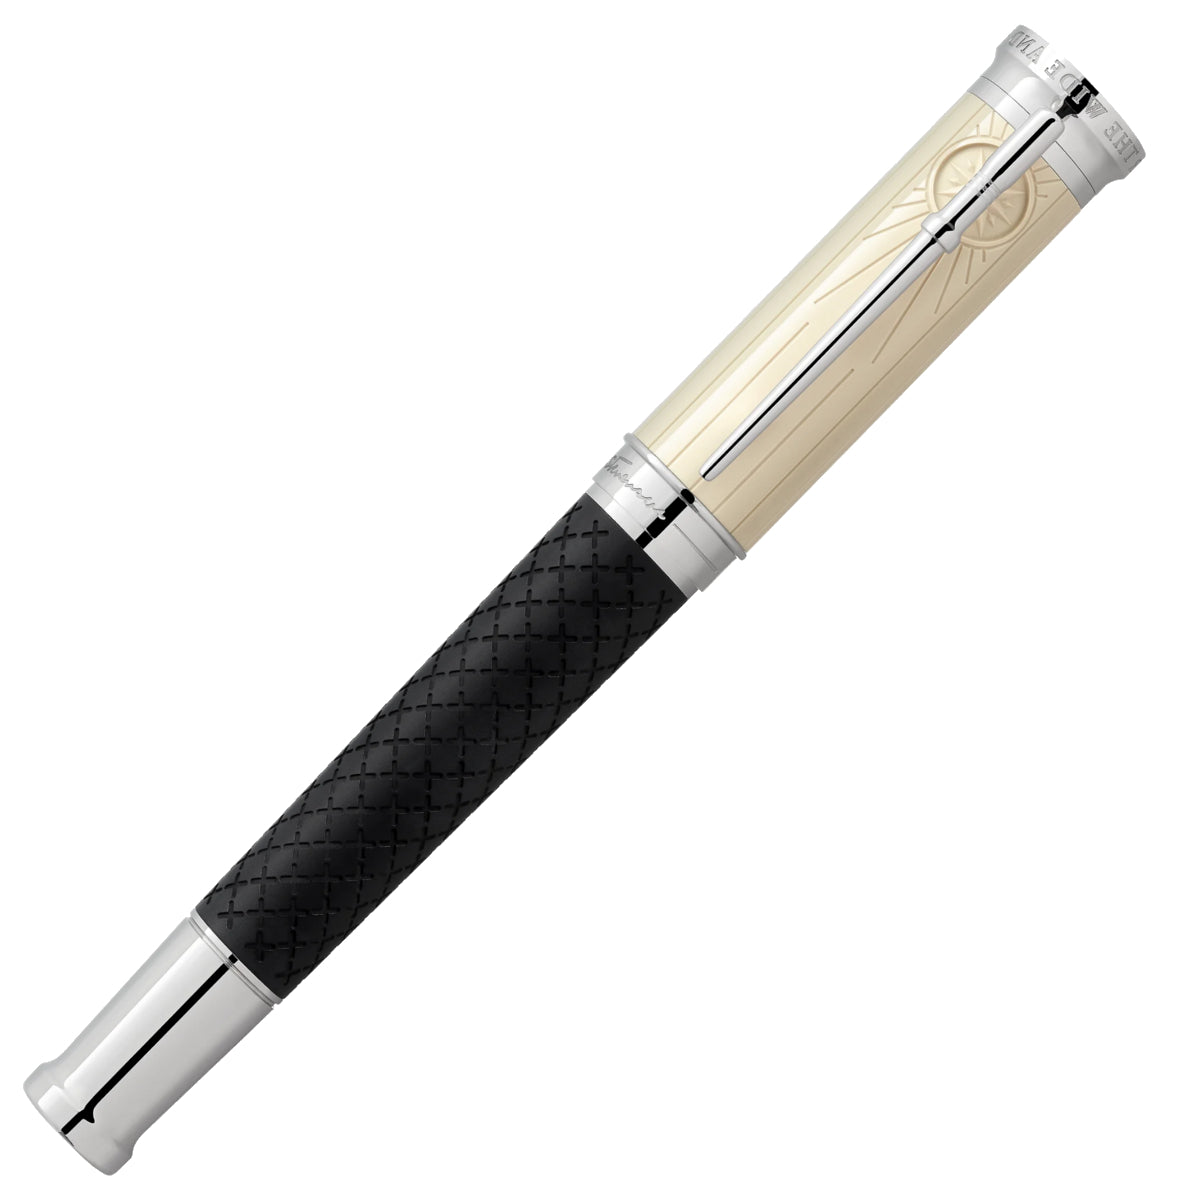 Stylo plume Writers Edition Hommage à Robert Louis Stevenson Limited Edition